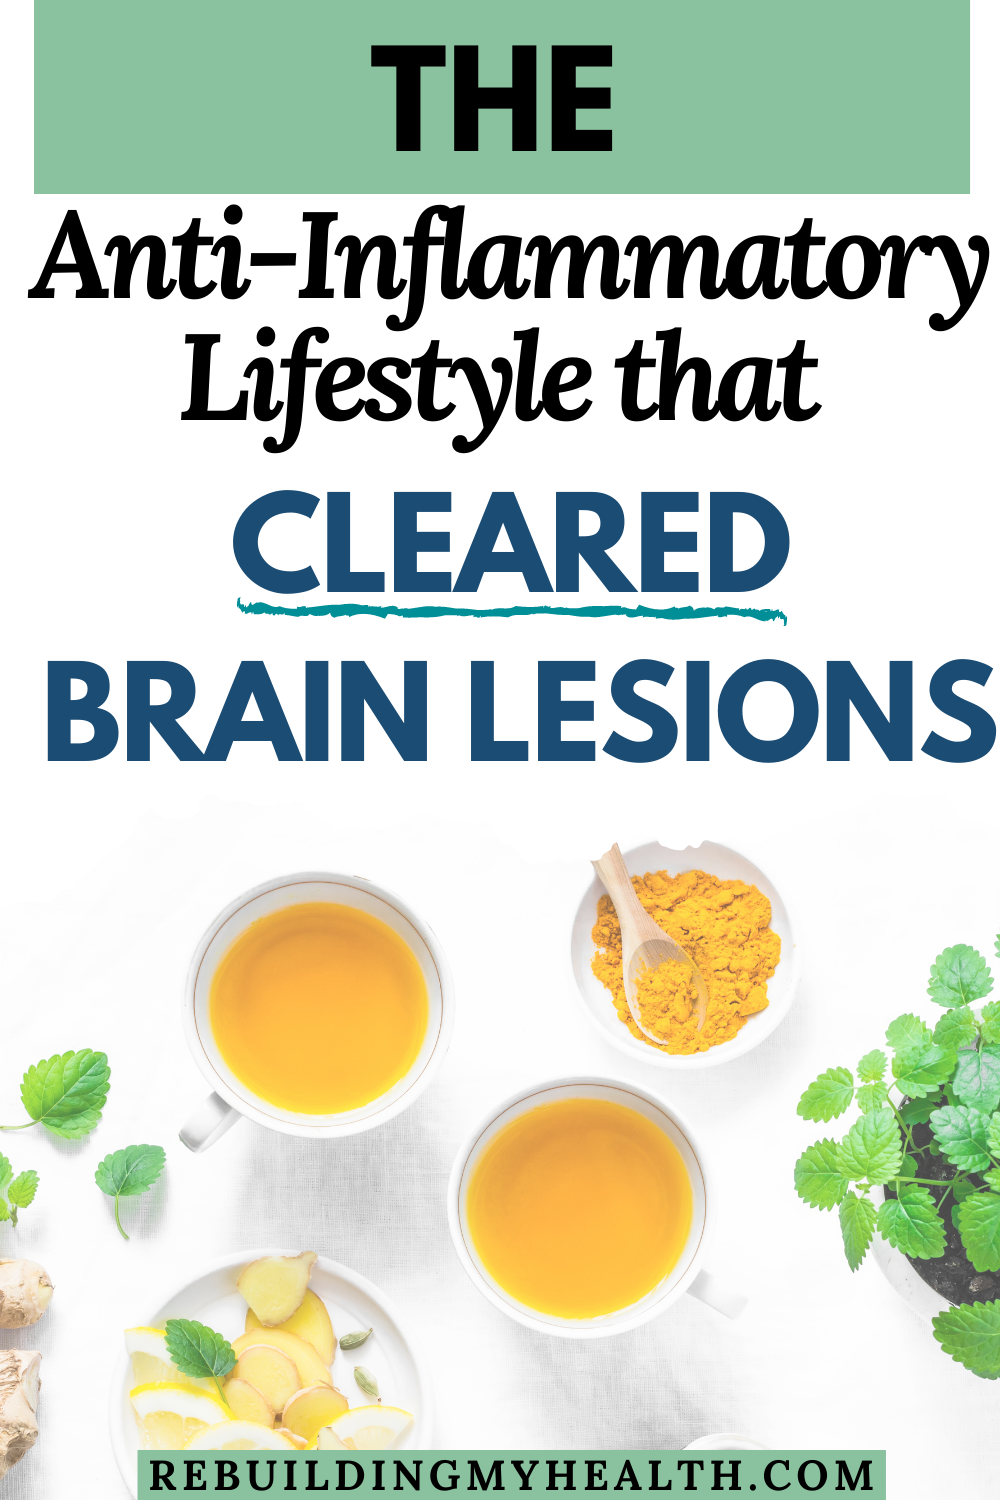 After a suspected stroke and possible multiple sclerosis, there's no evidence of brain lesions for one ER nurse - thanks to an anti-inflammatory lifestyle.